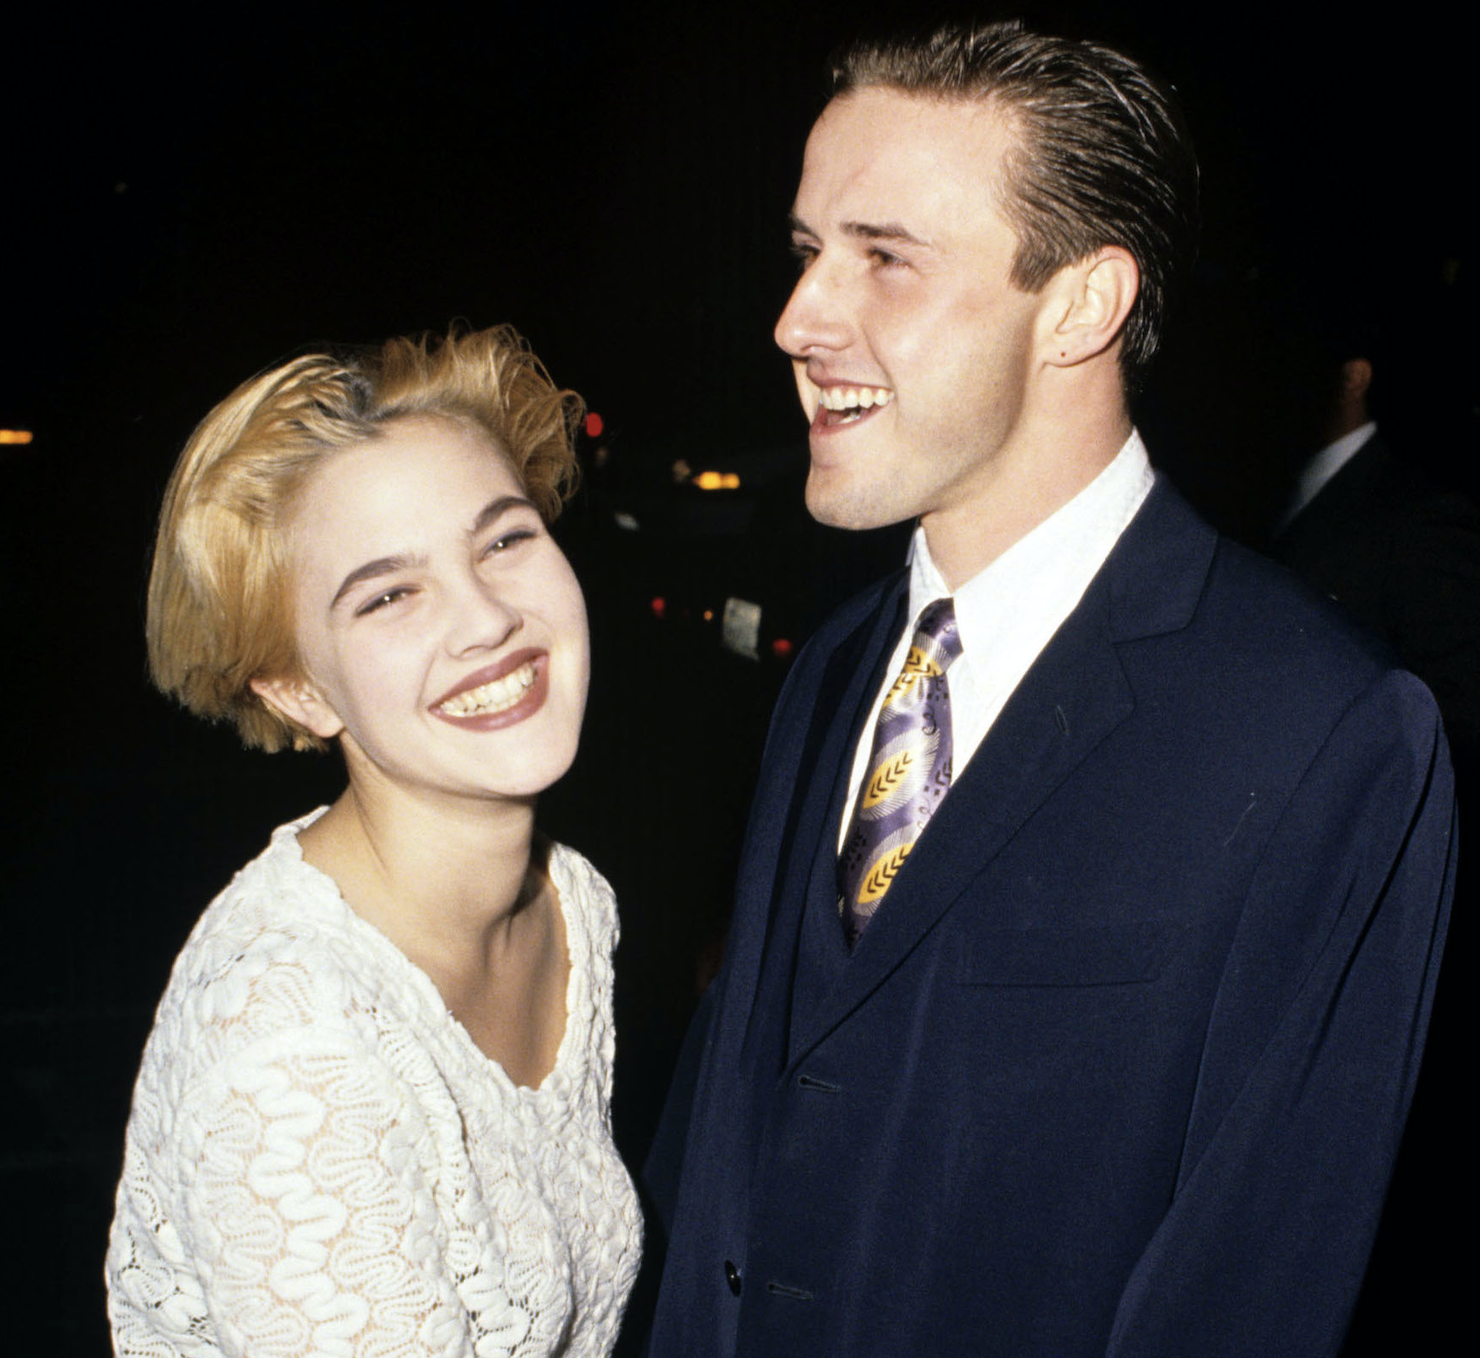 Drew Barrymore and David Arquette laughing together